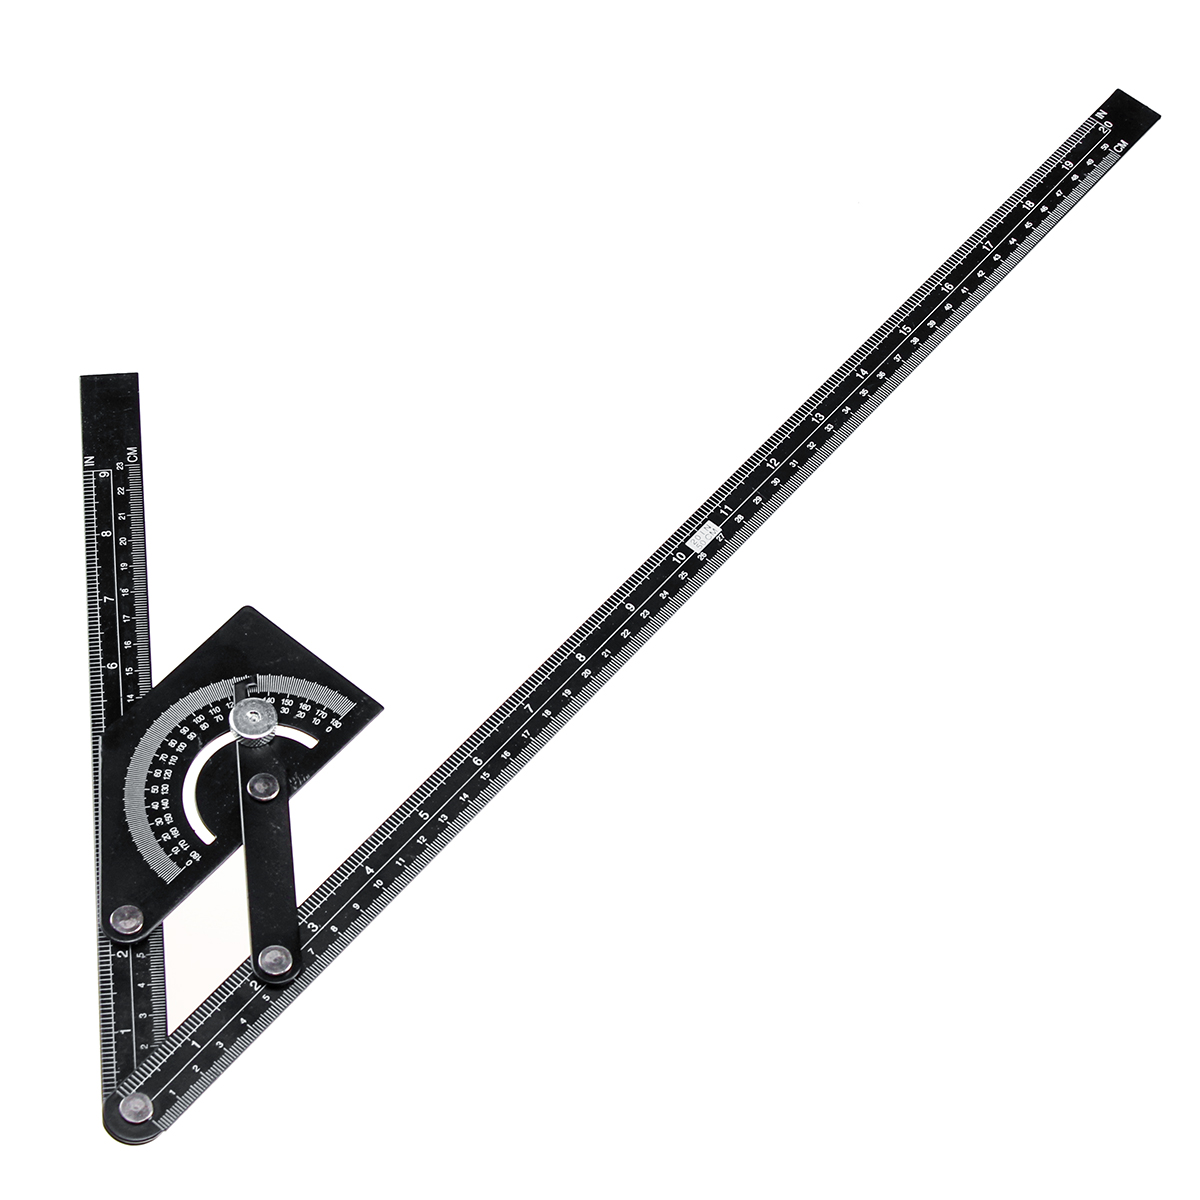 Angle-Ruler-Angle-Protractor-Stainless-Steel-180deg-Angle-Finder-Measure-Ruler-Gauge-Tool-230x500mm-1332790-7